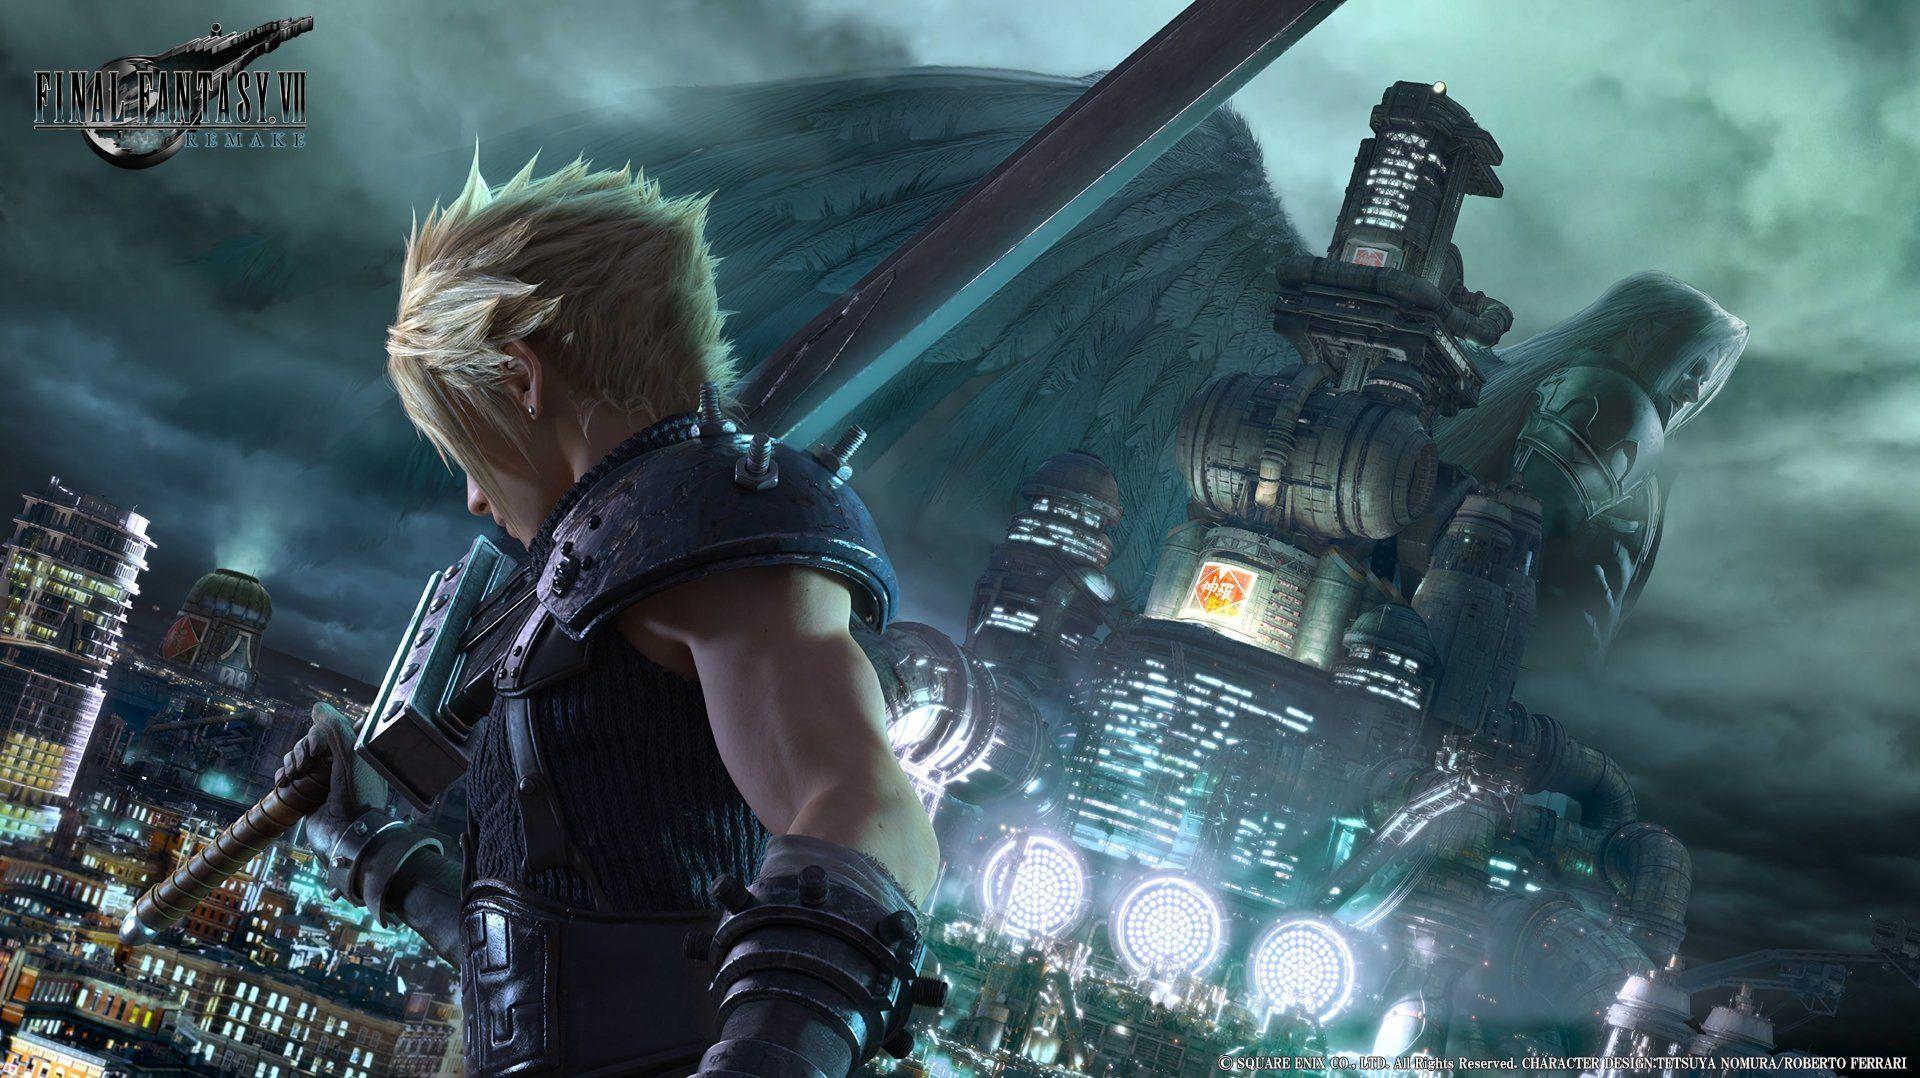 Cool Final Fantasy Vii Remake Wallpapers Top Free Cool Final Fantasy Vii Remake Backgrounds Wallpaperaccess